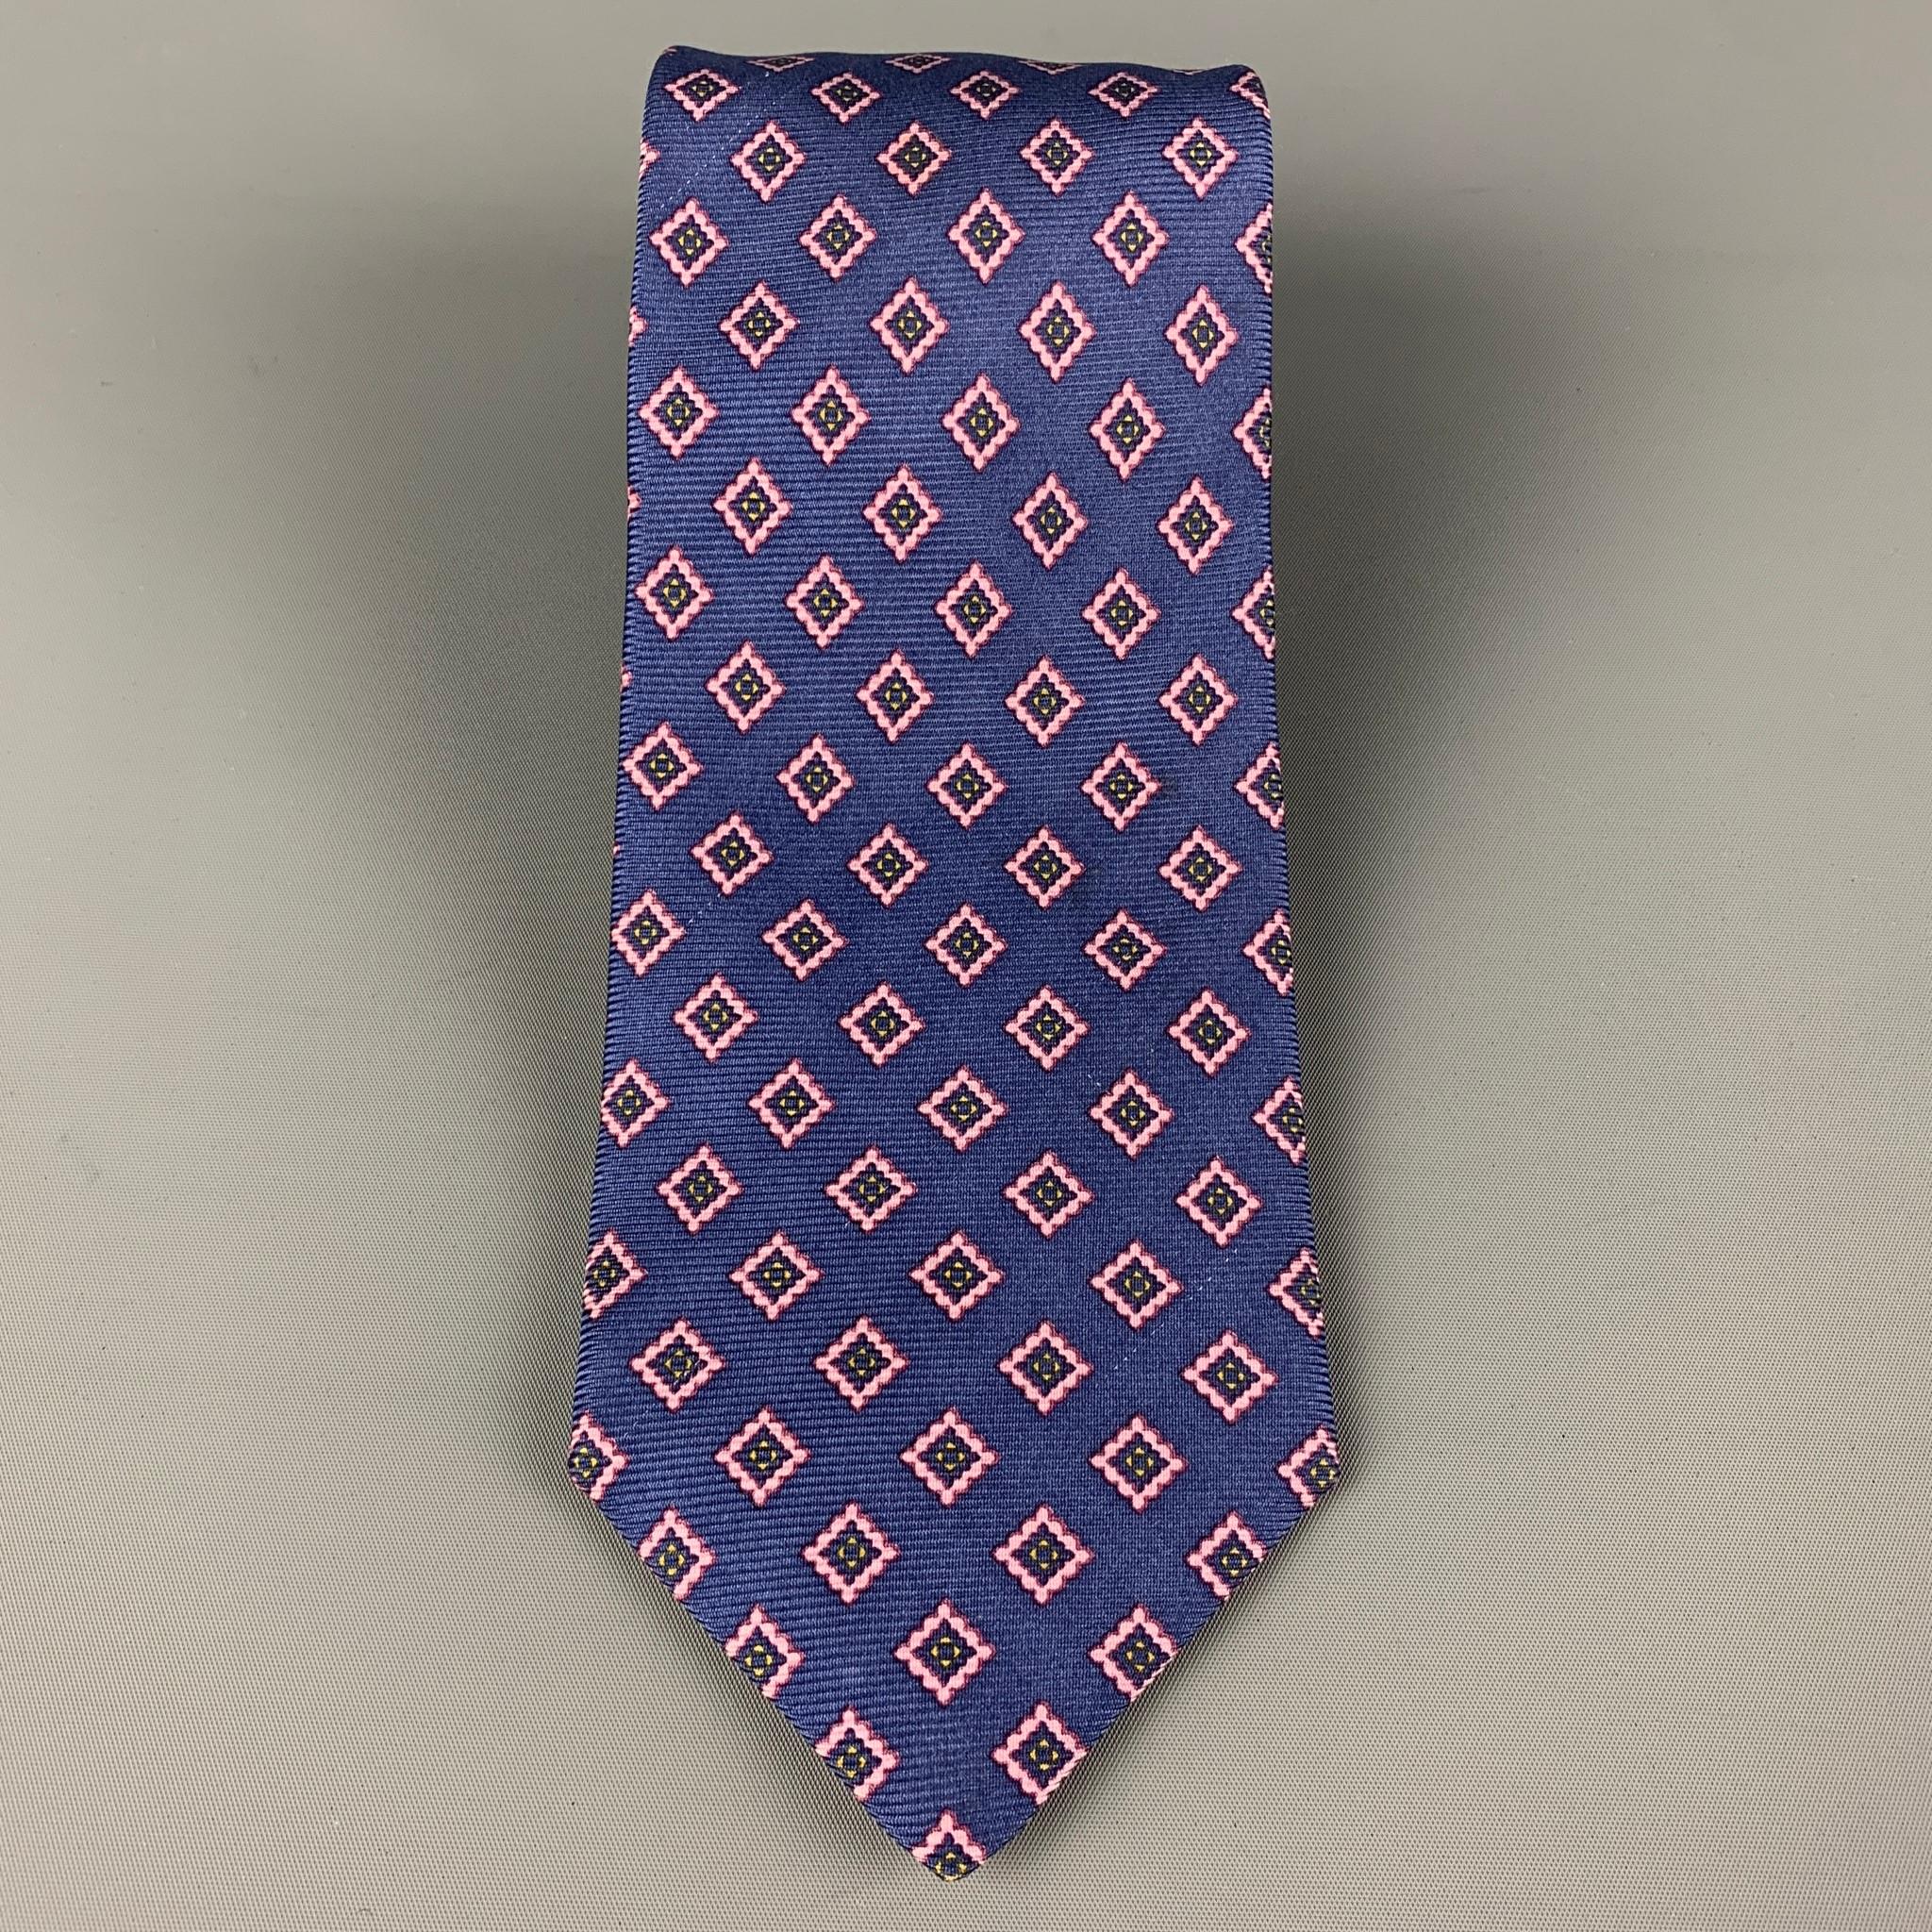 KITON necktie comes in a navy & pink silk with a all over rhombus print. Made in Italy .

Very Good Pre-Owned Condition.
Original Retail Price: $345.00

Width: 3.75 in.
Length: 58 in. 